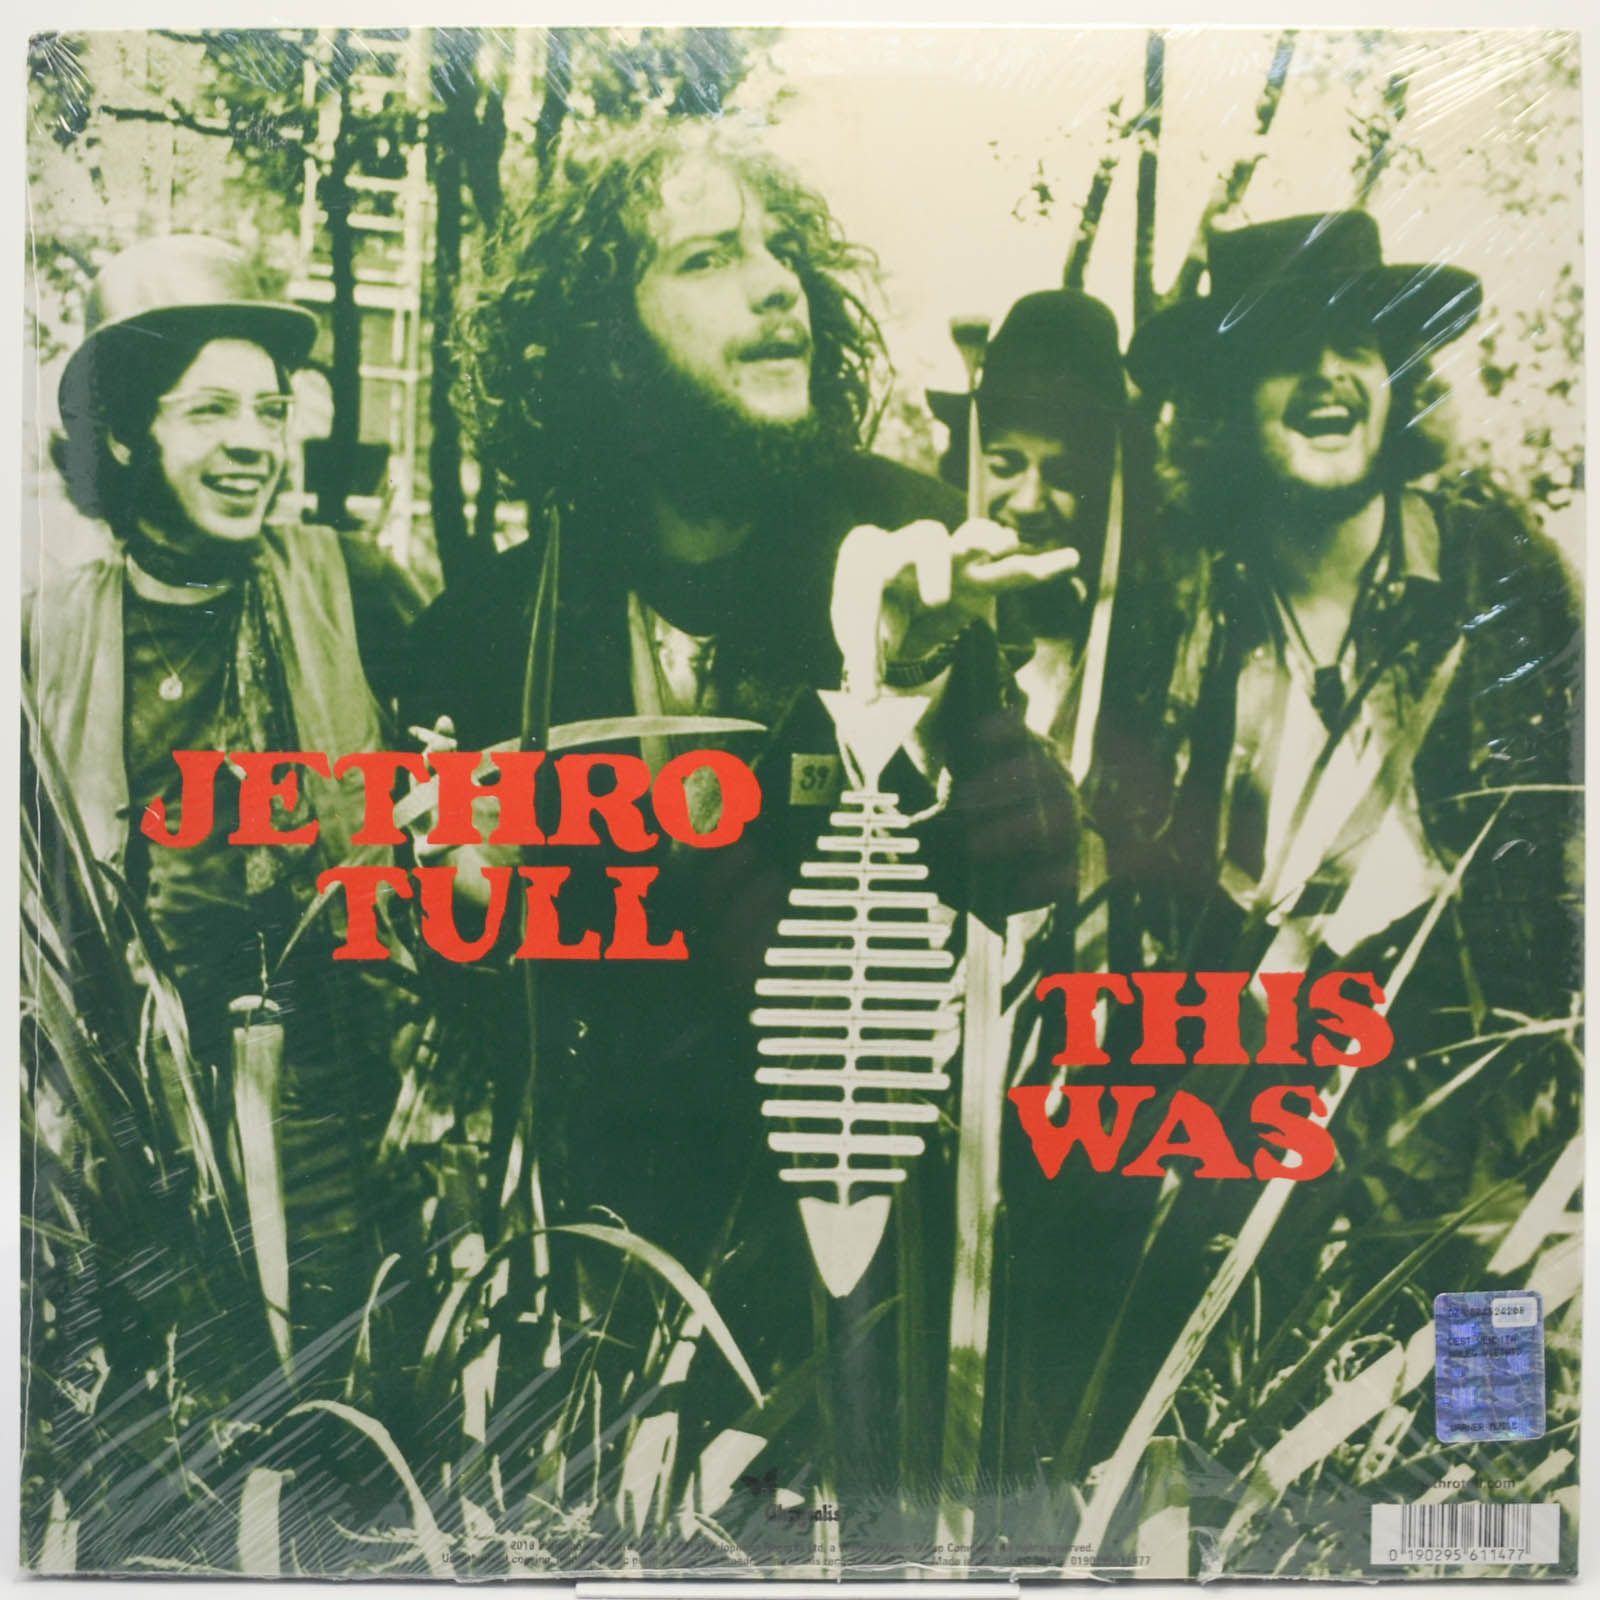 Jethro Tull — This Was, 1968